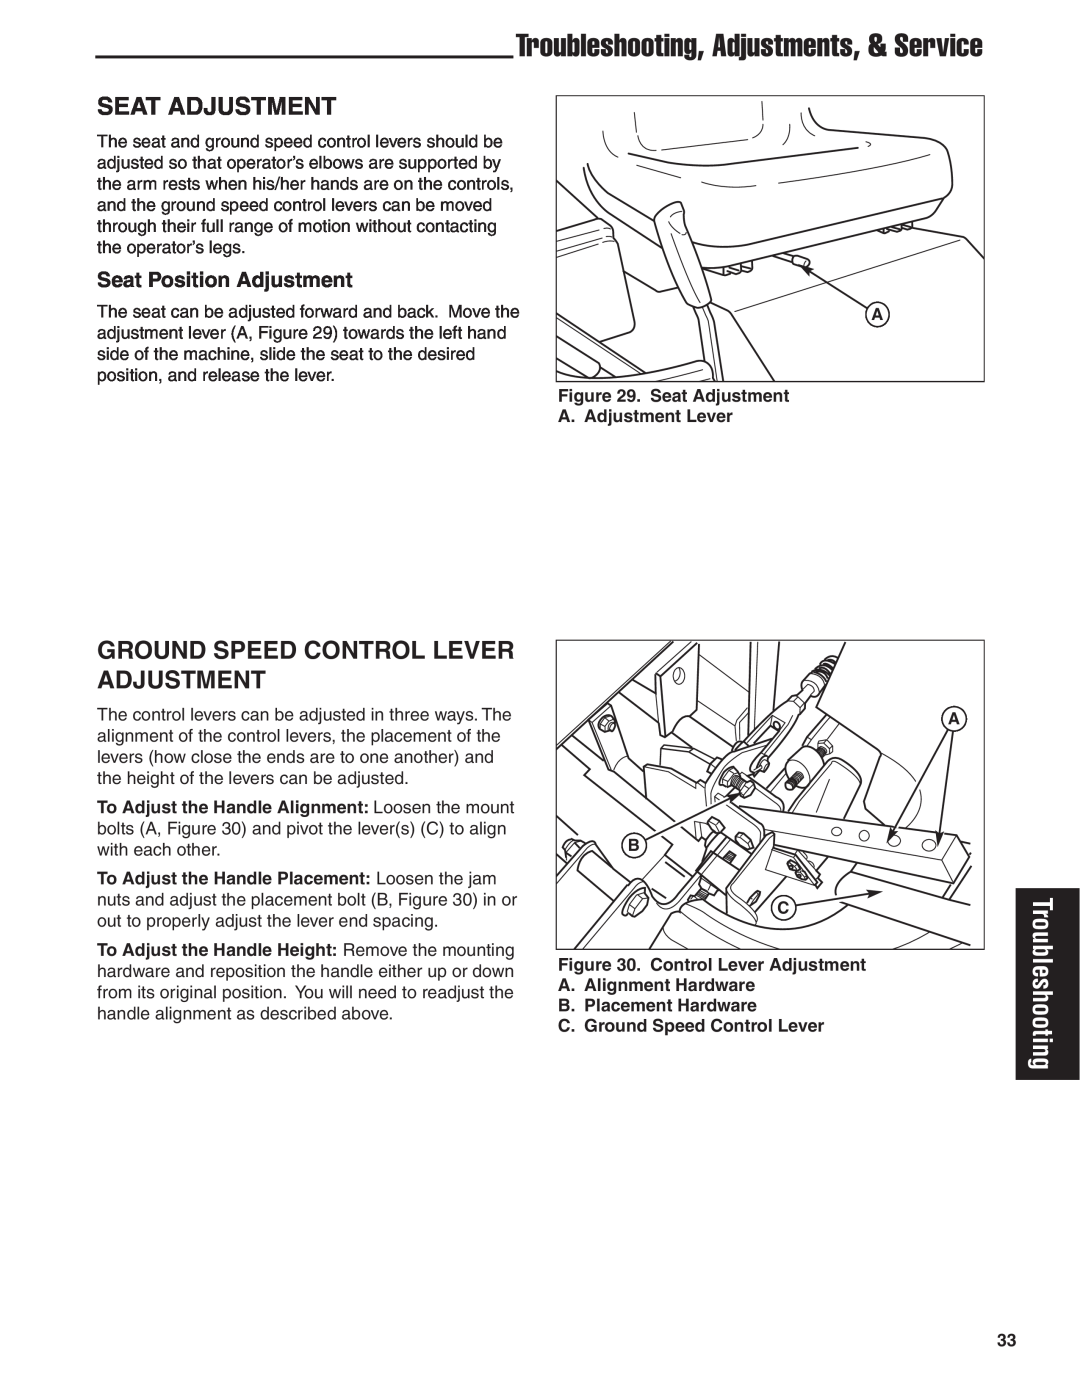 Simplicity 24HP manual Troubleshooting, Adjustments, & Service, Seat Adjustment, Ground Speed Control Lever Adjustment 